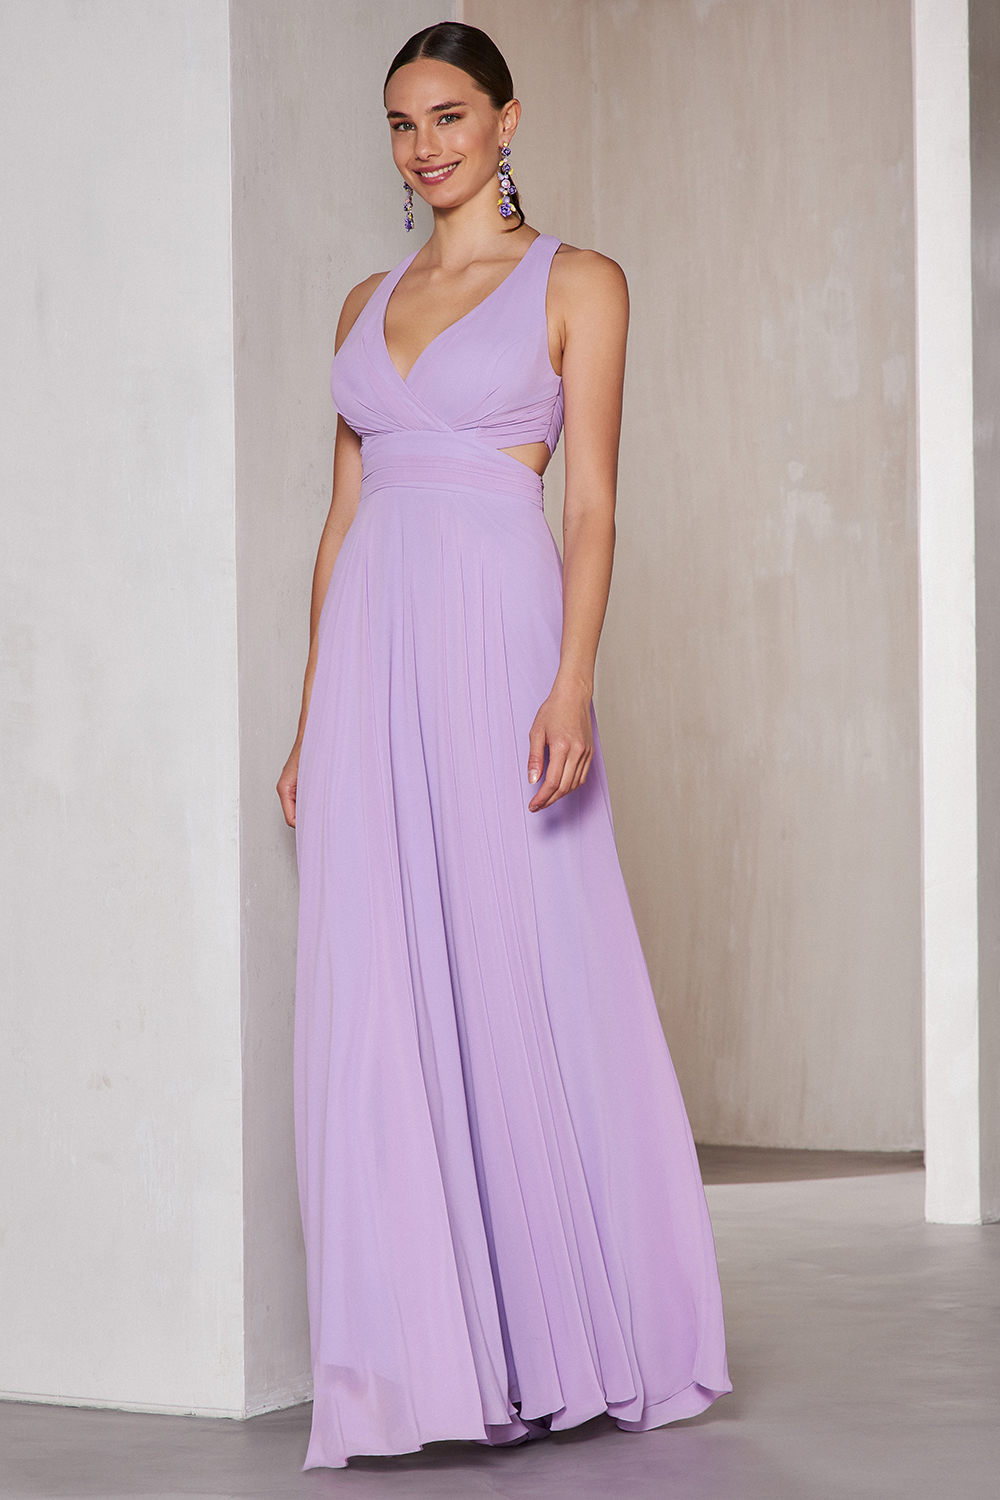 Cocktail Dresses / Long cocktail chiffon dress with open back